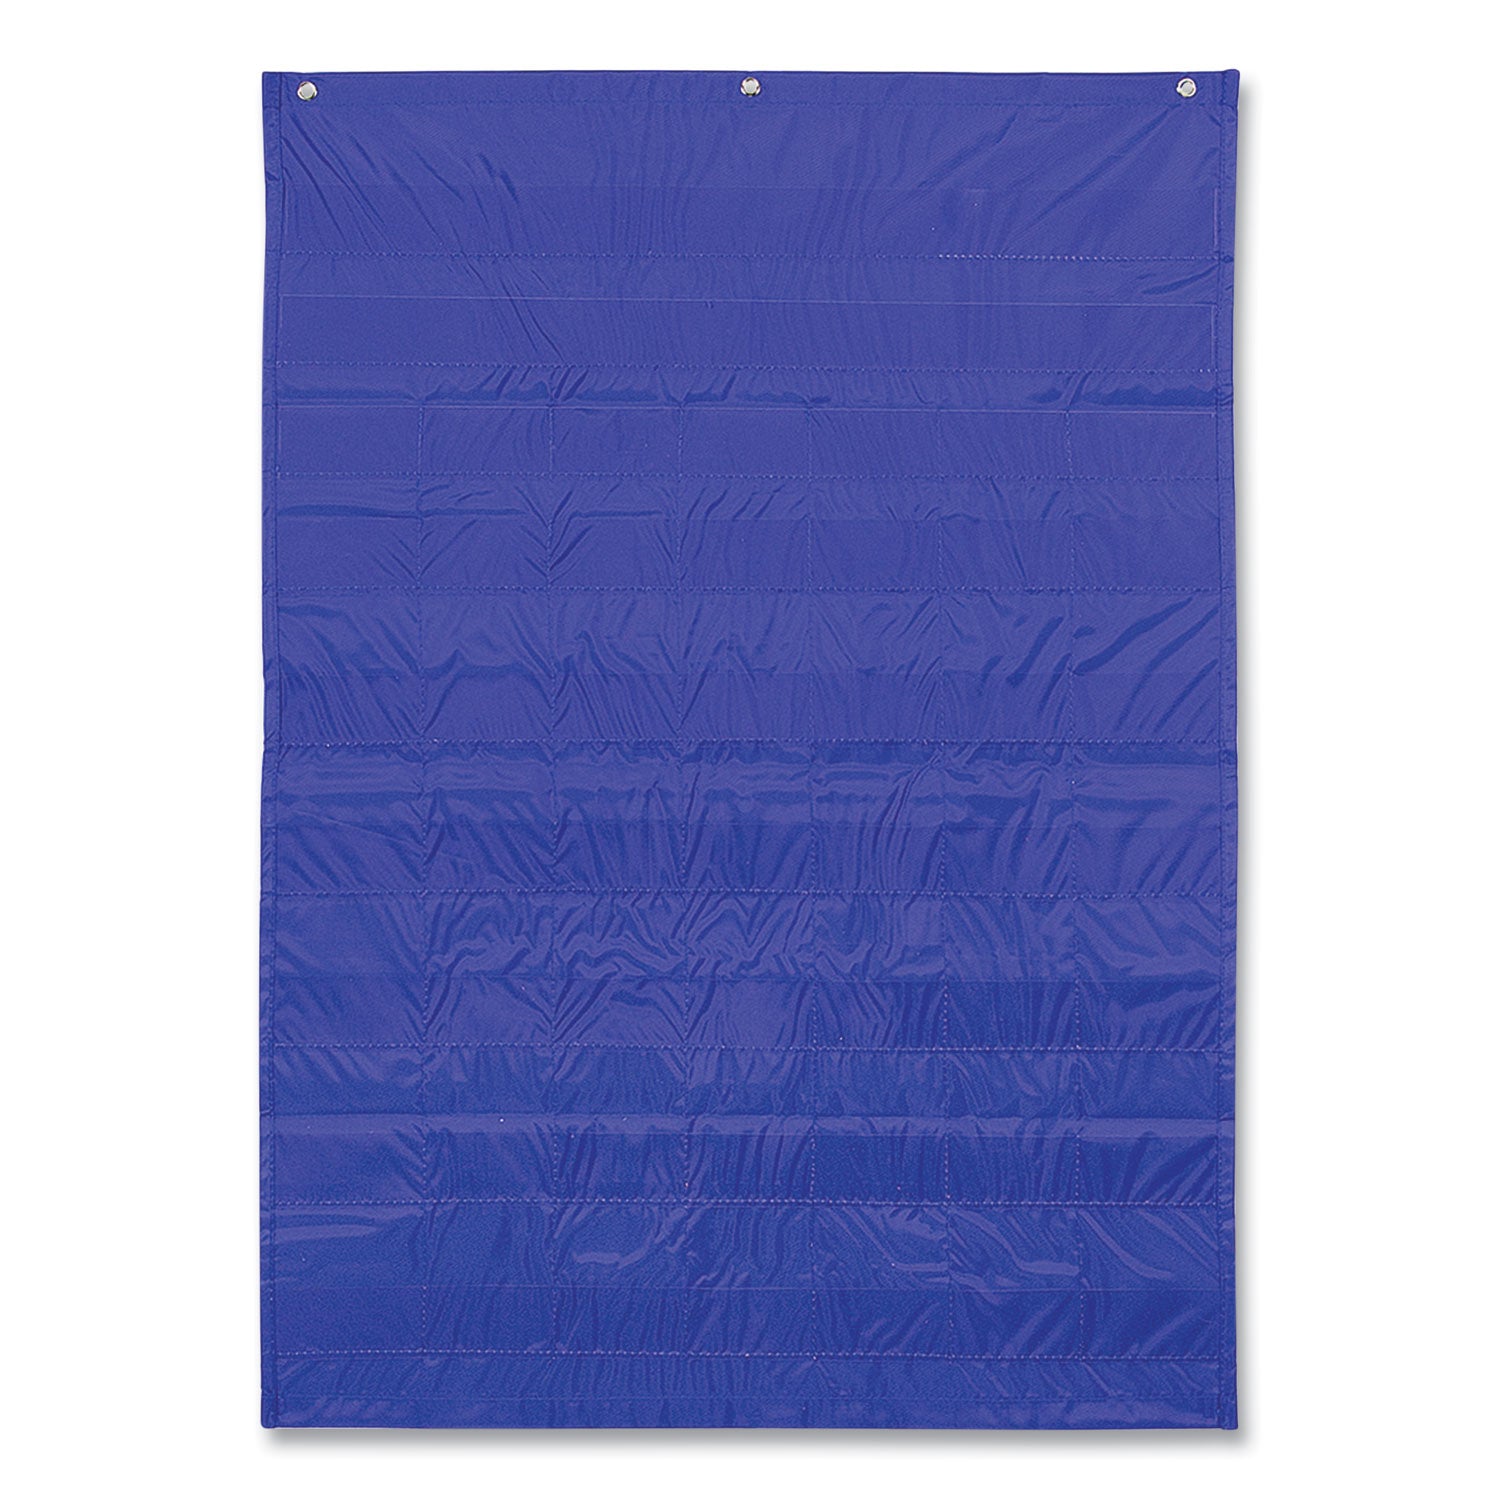 complete-calendar-and-weather-pocket-chart-51-pockets-26-x-3725-blue_cdp158003 - 2